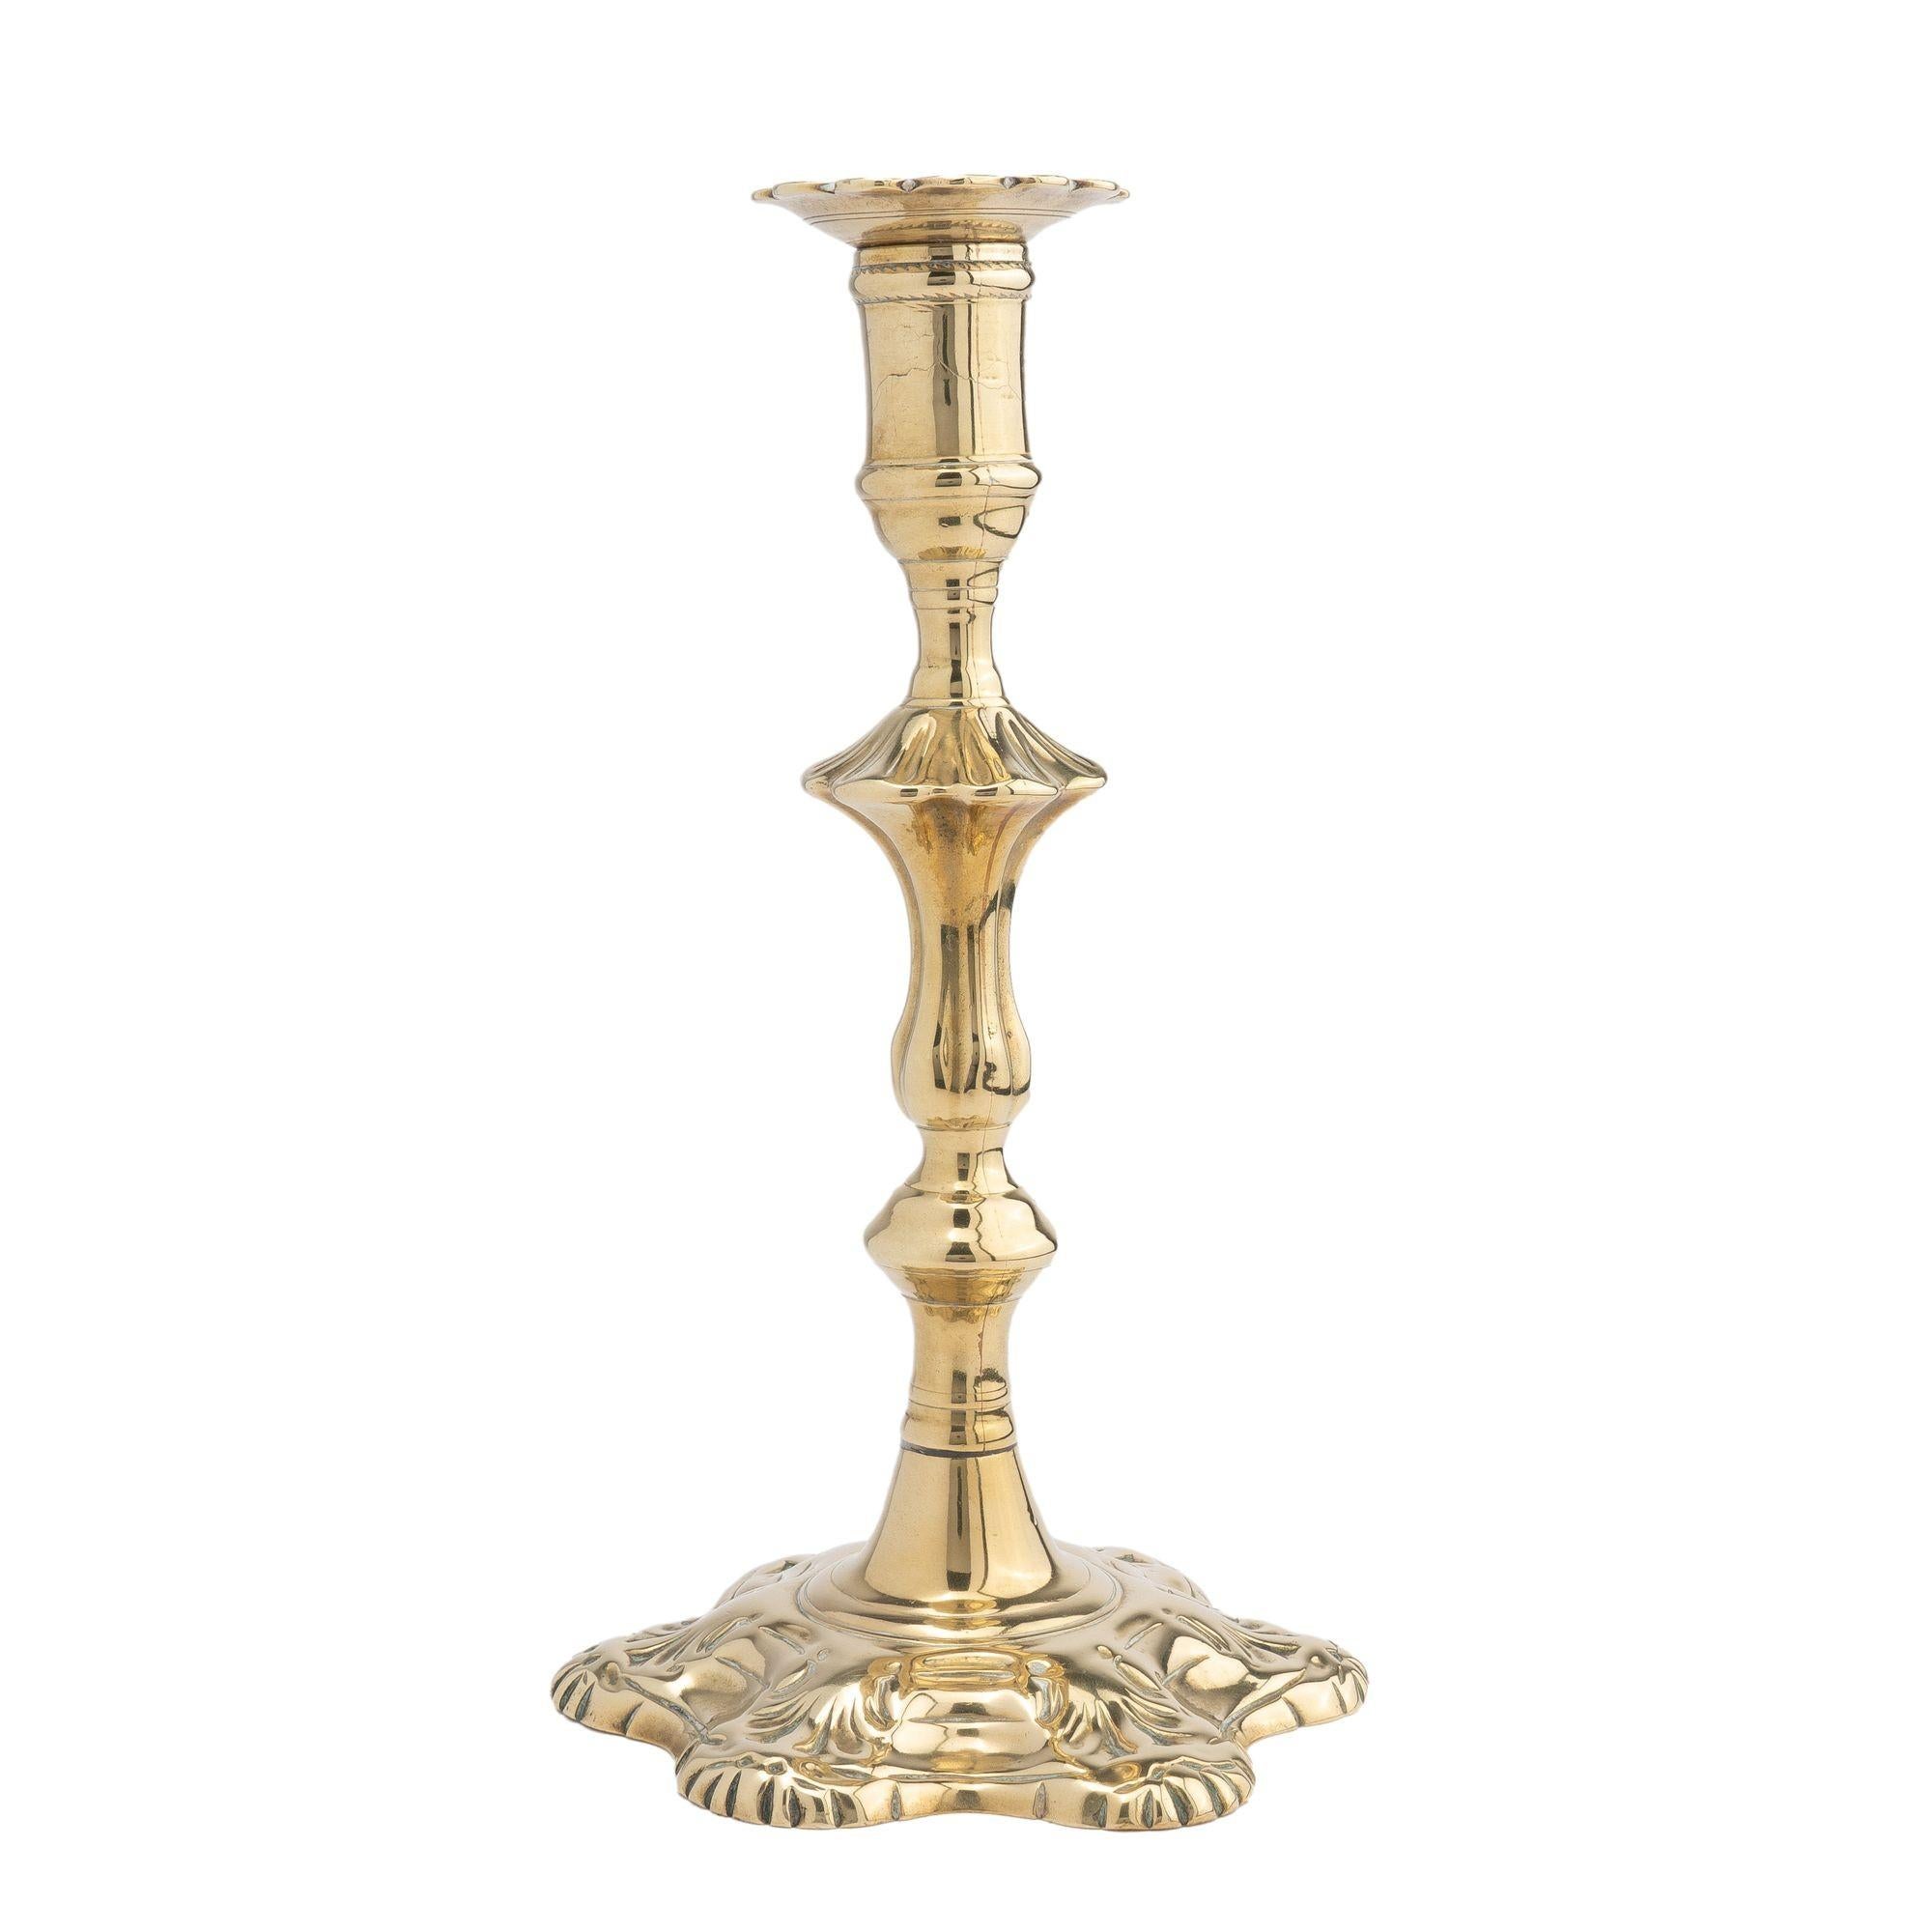 Queen Anne seam cast brass candlestick. The candlestick features a removable scolloped edge bobeshe on an urn form candle cup with waisted stem, which flows into a suppressed ruffled knob on a fluted, extended tulip form shaft over a suppressed